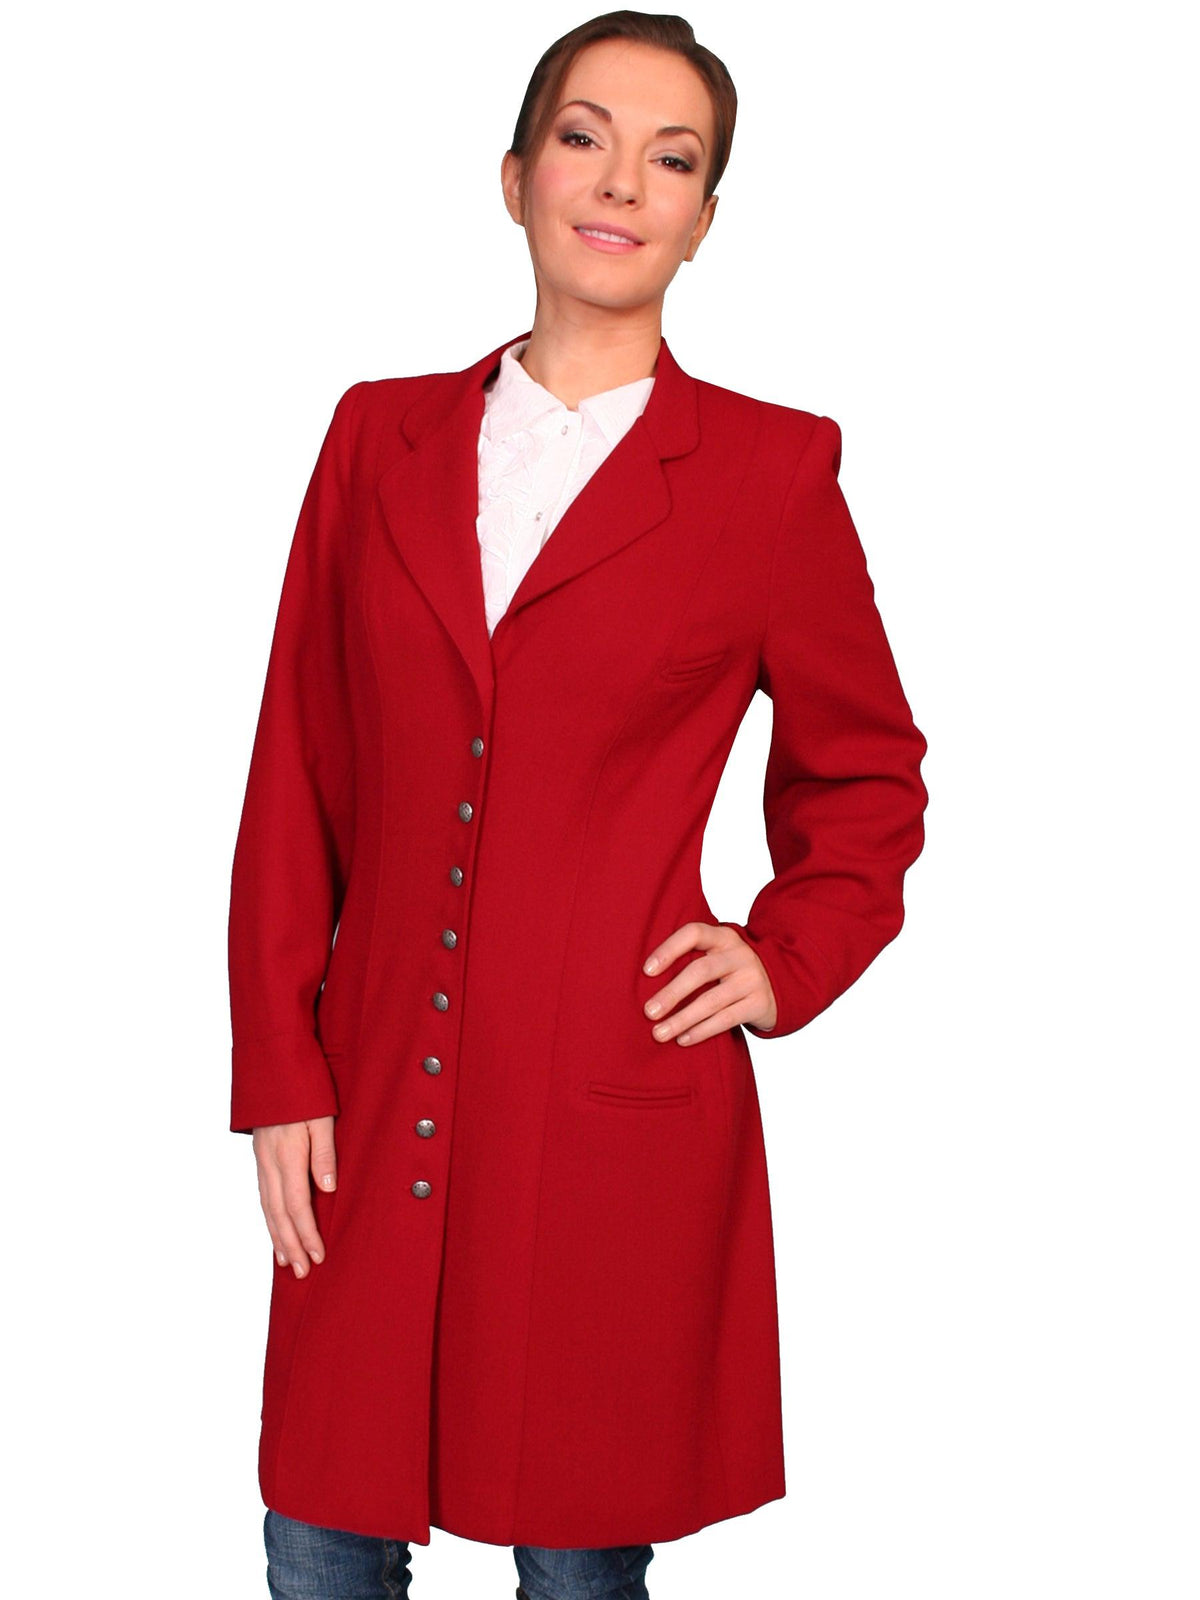 Scully DARK RED WOOL CREPE FROCK COAT - Flyclothing LLC